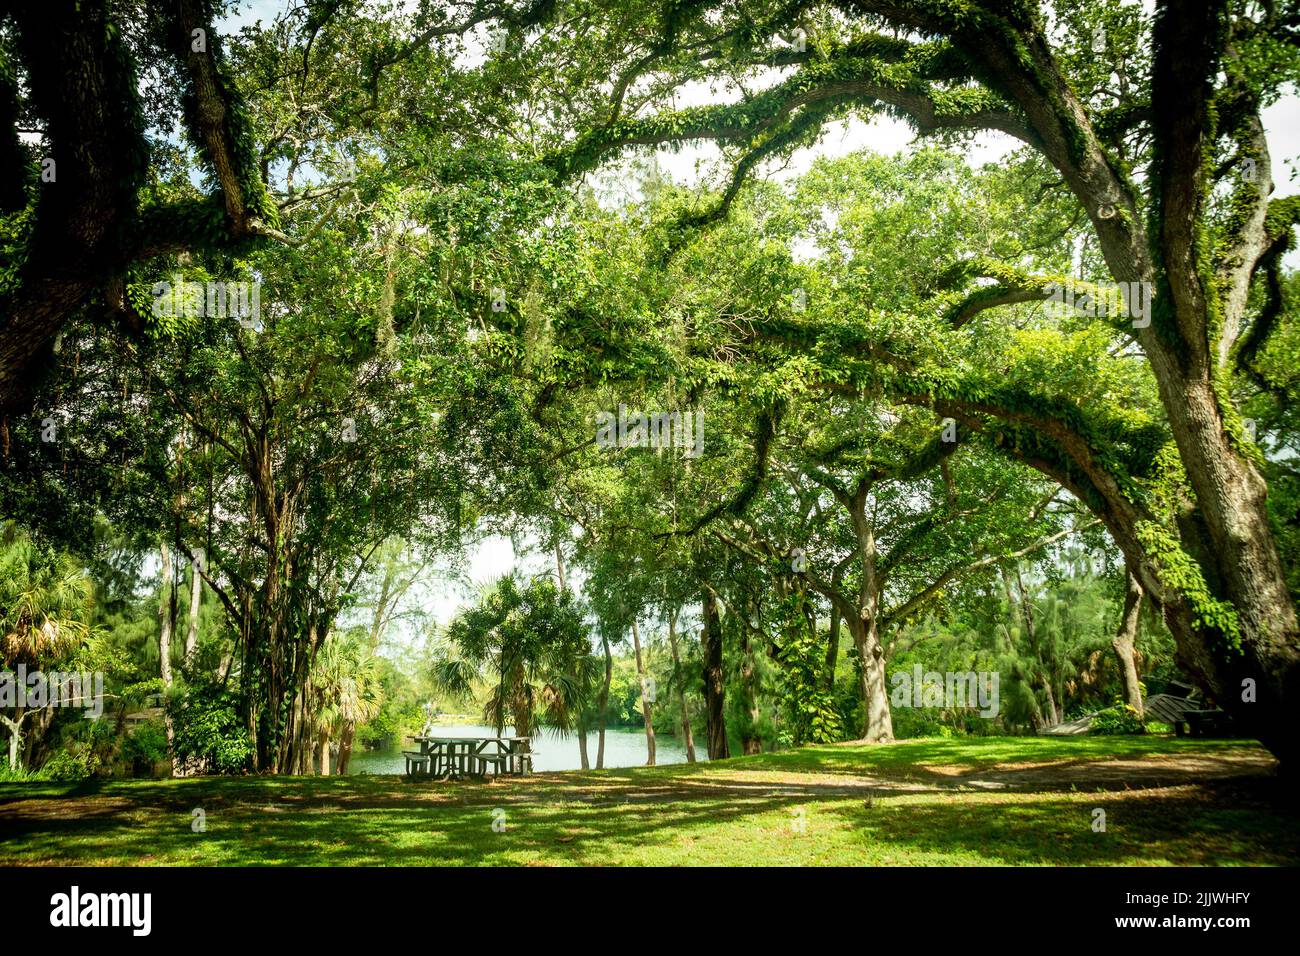 Beautiful natural tree covered with leaves at Snyder Park in Fort Lauderdale Florida Stock Photo